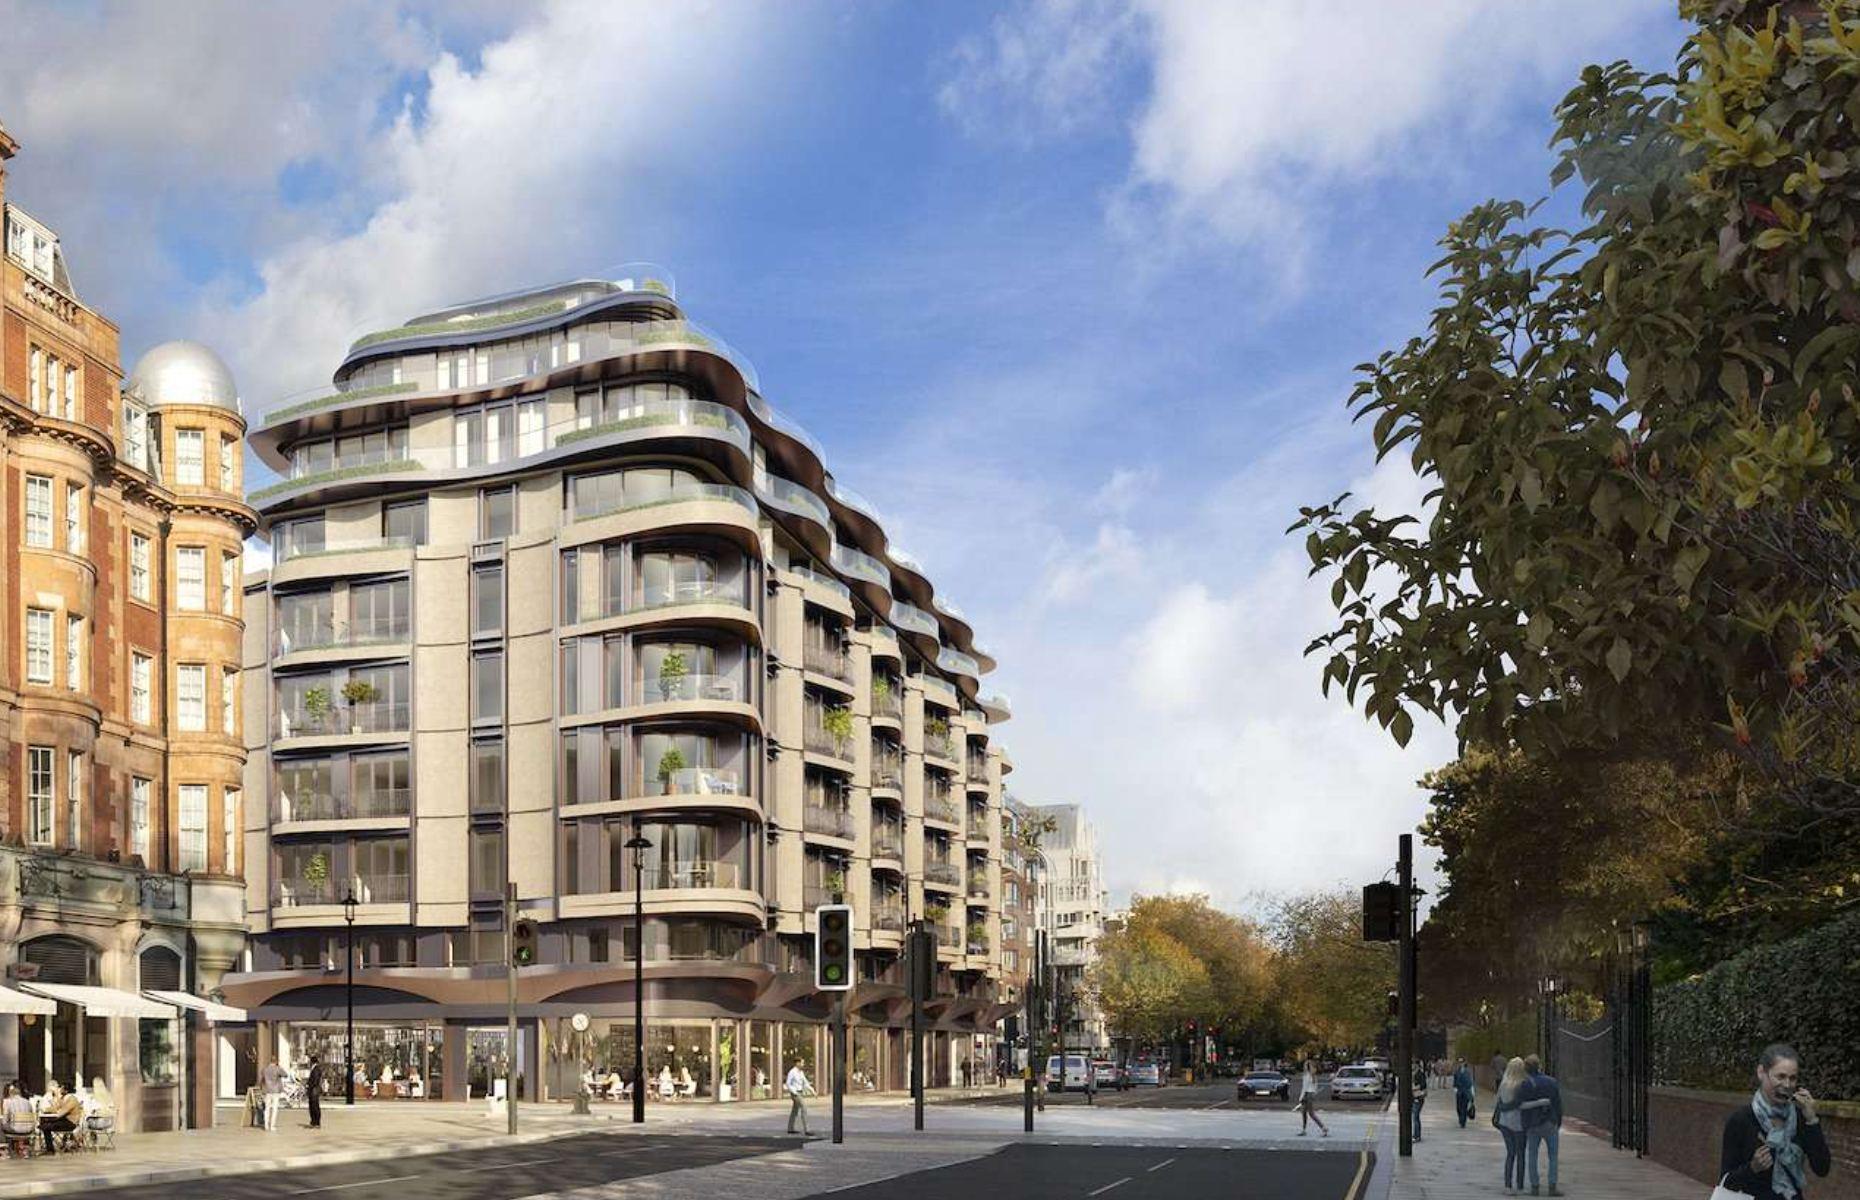 <p>It may be discreet from the outside, but the largest penthouse in the <a href="https://www.savills.com.hk/find-a-property/property-selection/international-residential-sales/london/park-modern.aspx">Park Modern</a> development came with a hefty $76 million <a href="https://www.mansionglobal.com/articles/hyde-park-project-unveils-60-million-crown-jewel-penthouse-228011">price tag</a>, making it London’s most expensive apartment. The 57-home project in Queensway was designed by architects PLP, who designed 22 Bishopsgate in the city of London, which is currently the second-tallest building in Britain after the Shard. The project was supposed to be finished in summer 2023, but no news has yet been announced confirming the completion of Park Modern.   </p>